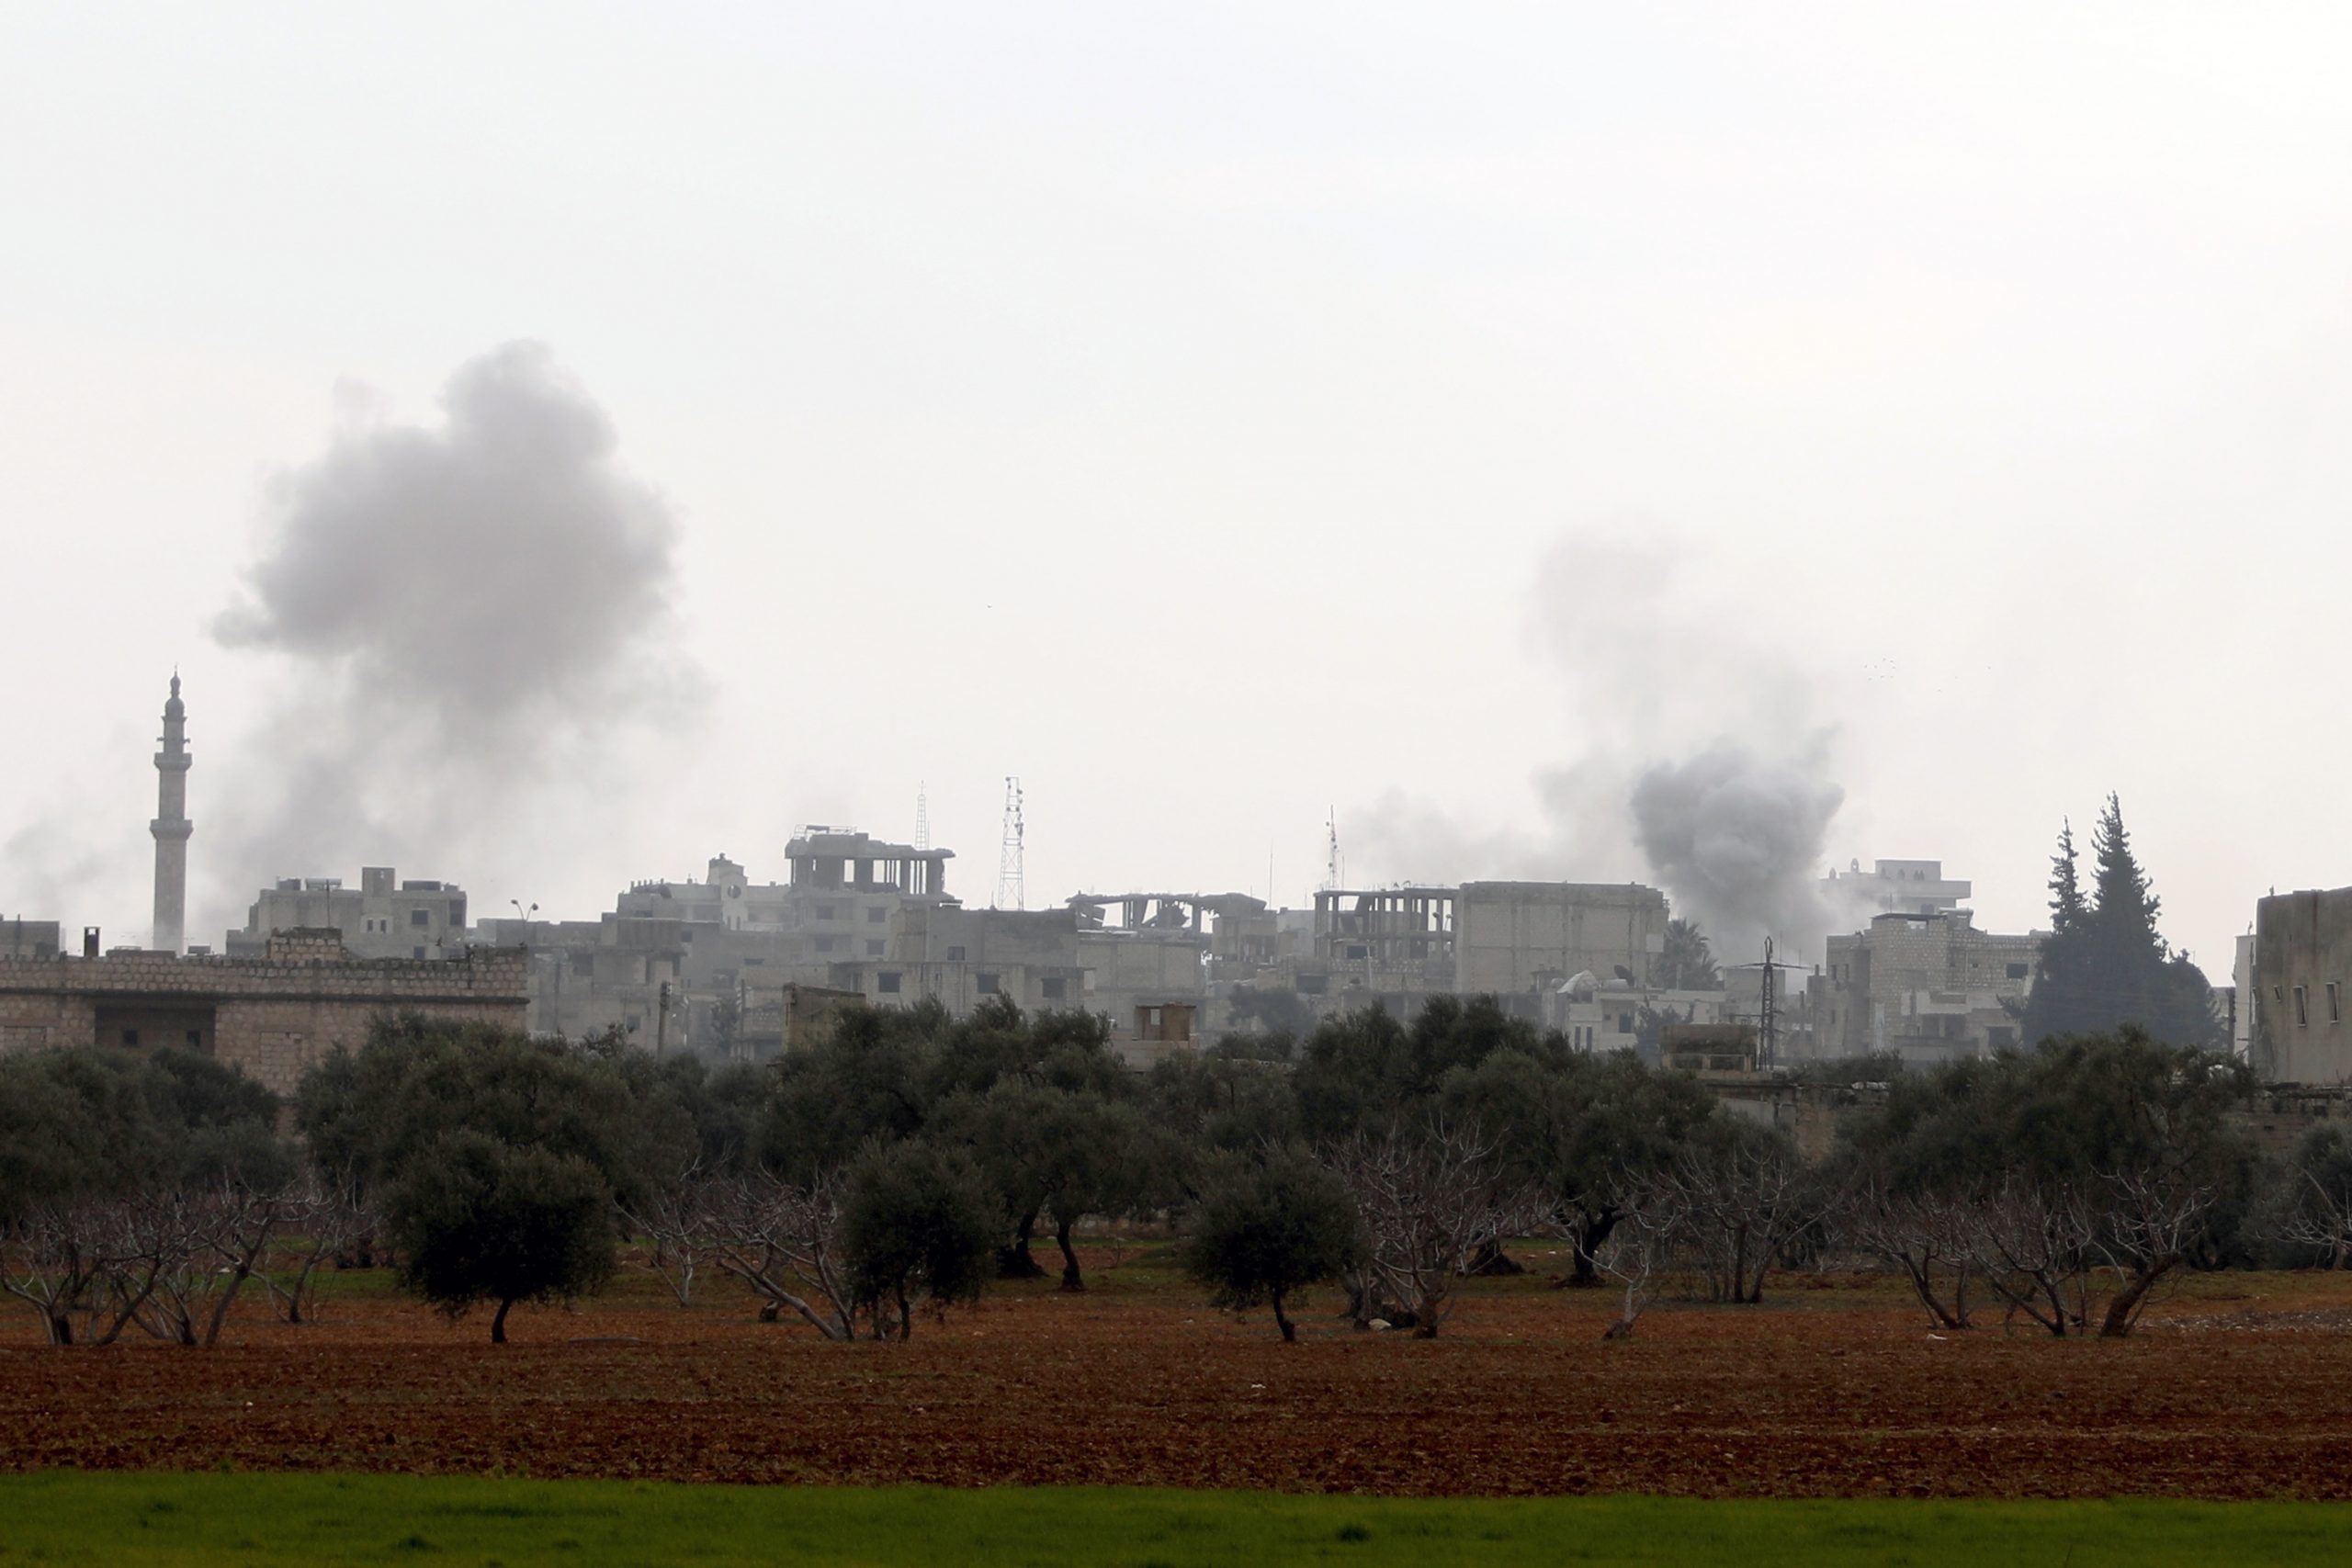 epa08192585 Smoke rises during government forces bombing on the village of Sarman, in Maarrat al-Nu'man district, Idlib, Syria, 04 February 2020. According to Syrian official news reports, the Syrian army units launched operation against last rebel-held stronghold in Idleb and the surrounding areas. According to the UN, 520,000 people were displaced since the operations began in December 2019.  EPA/YAHYA NEMAH